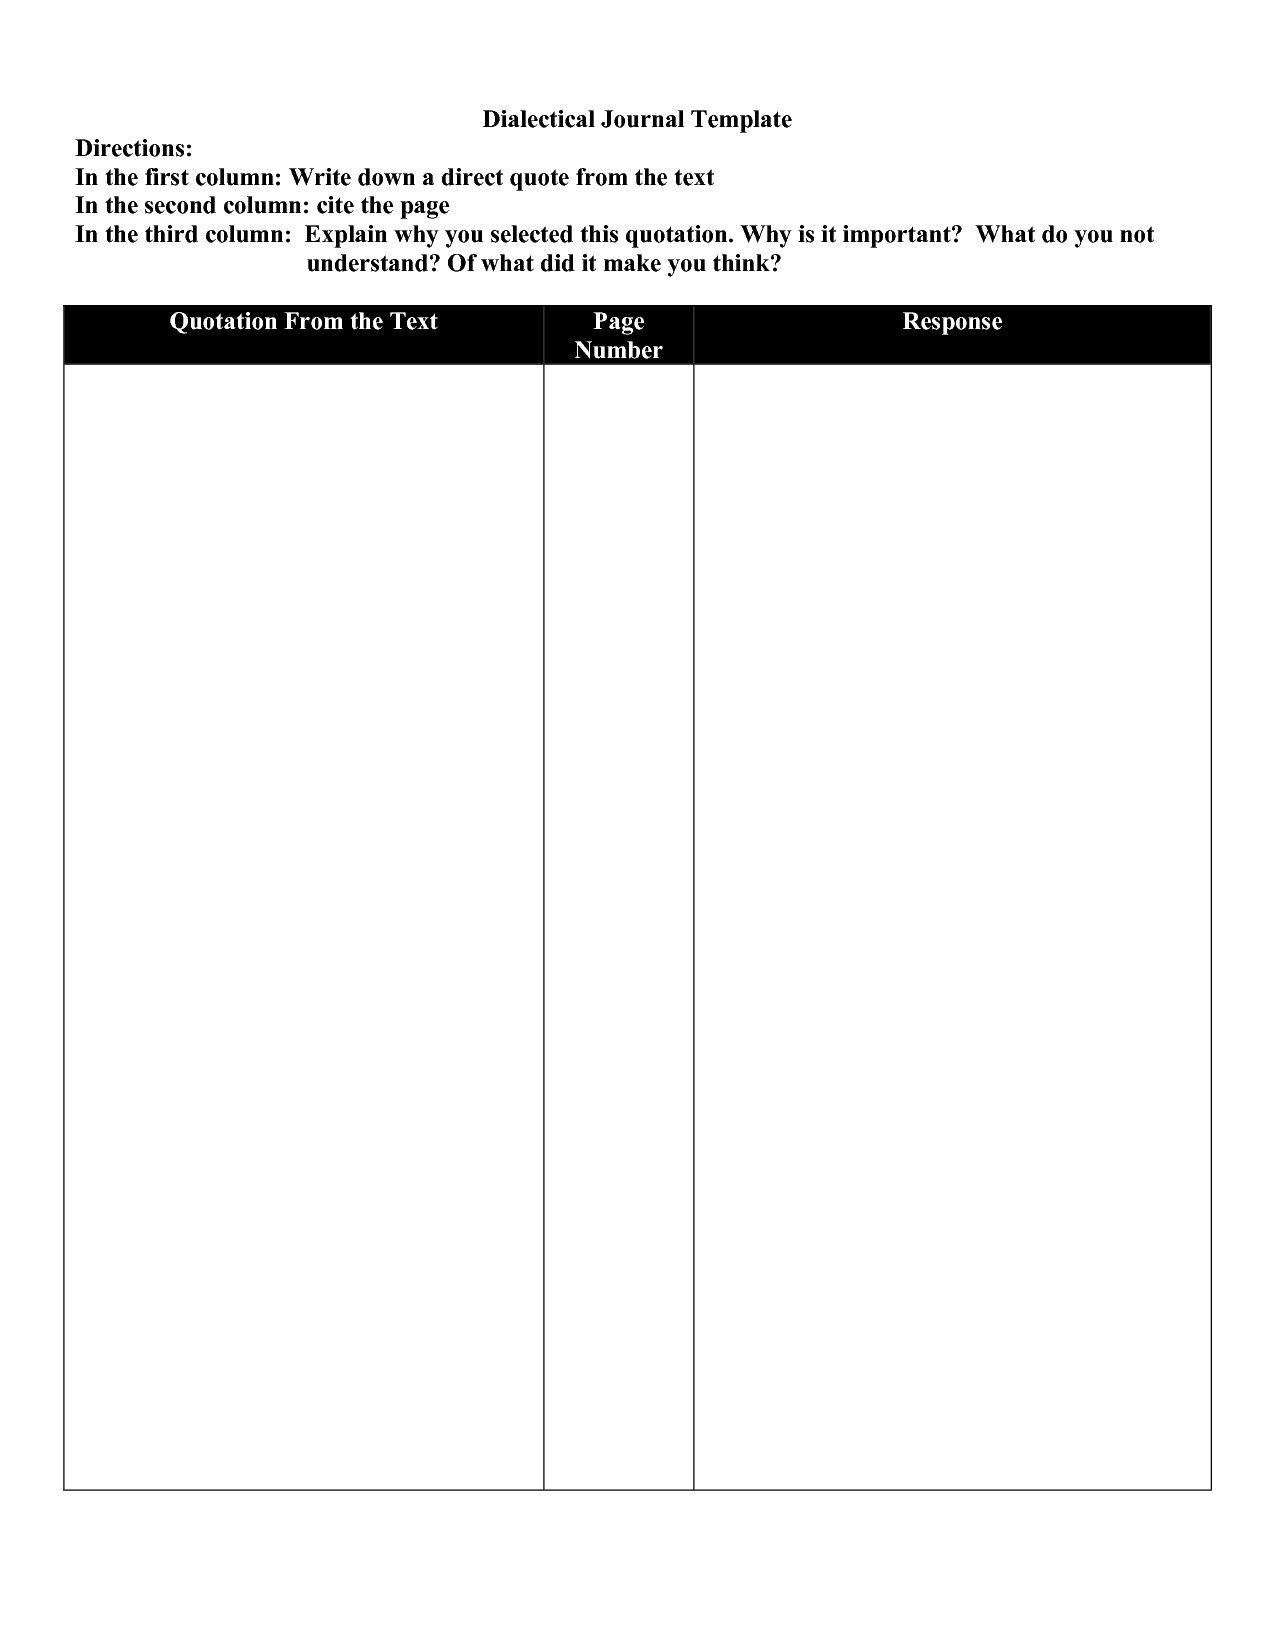 Dialectical Journal Template